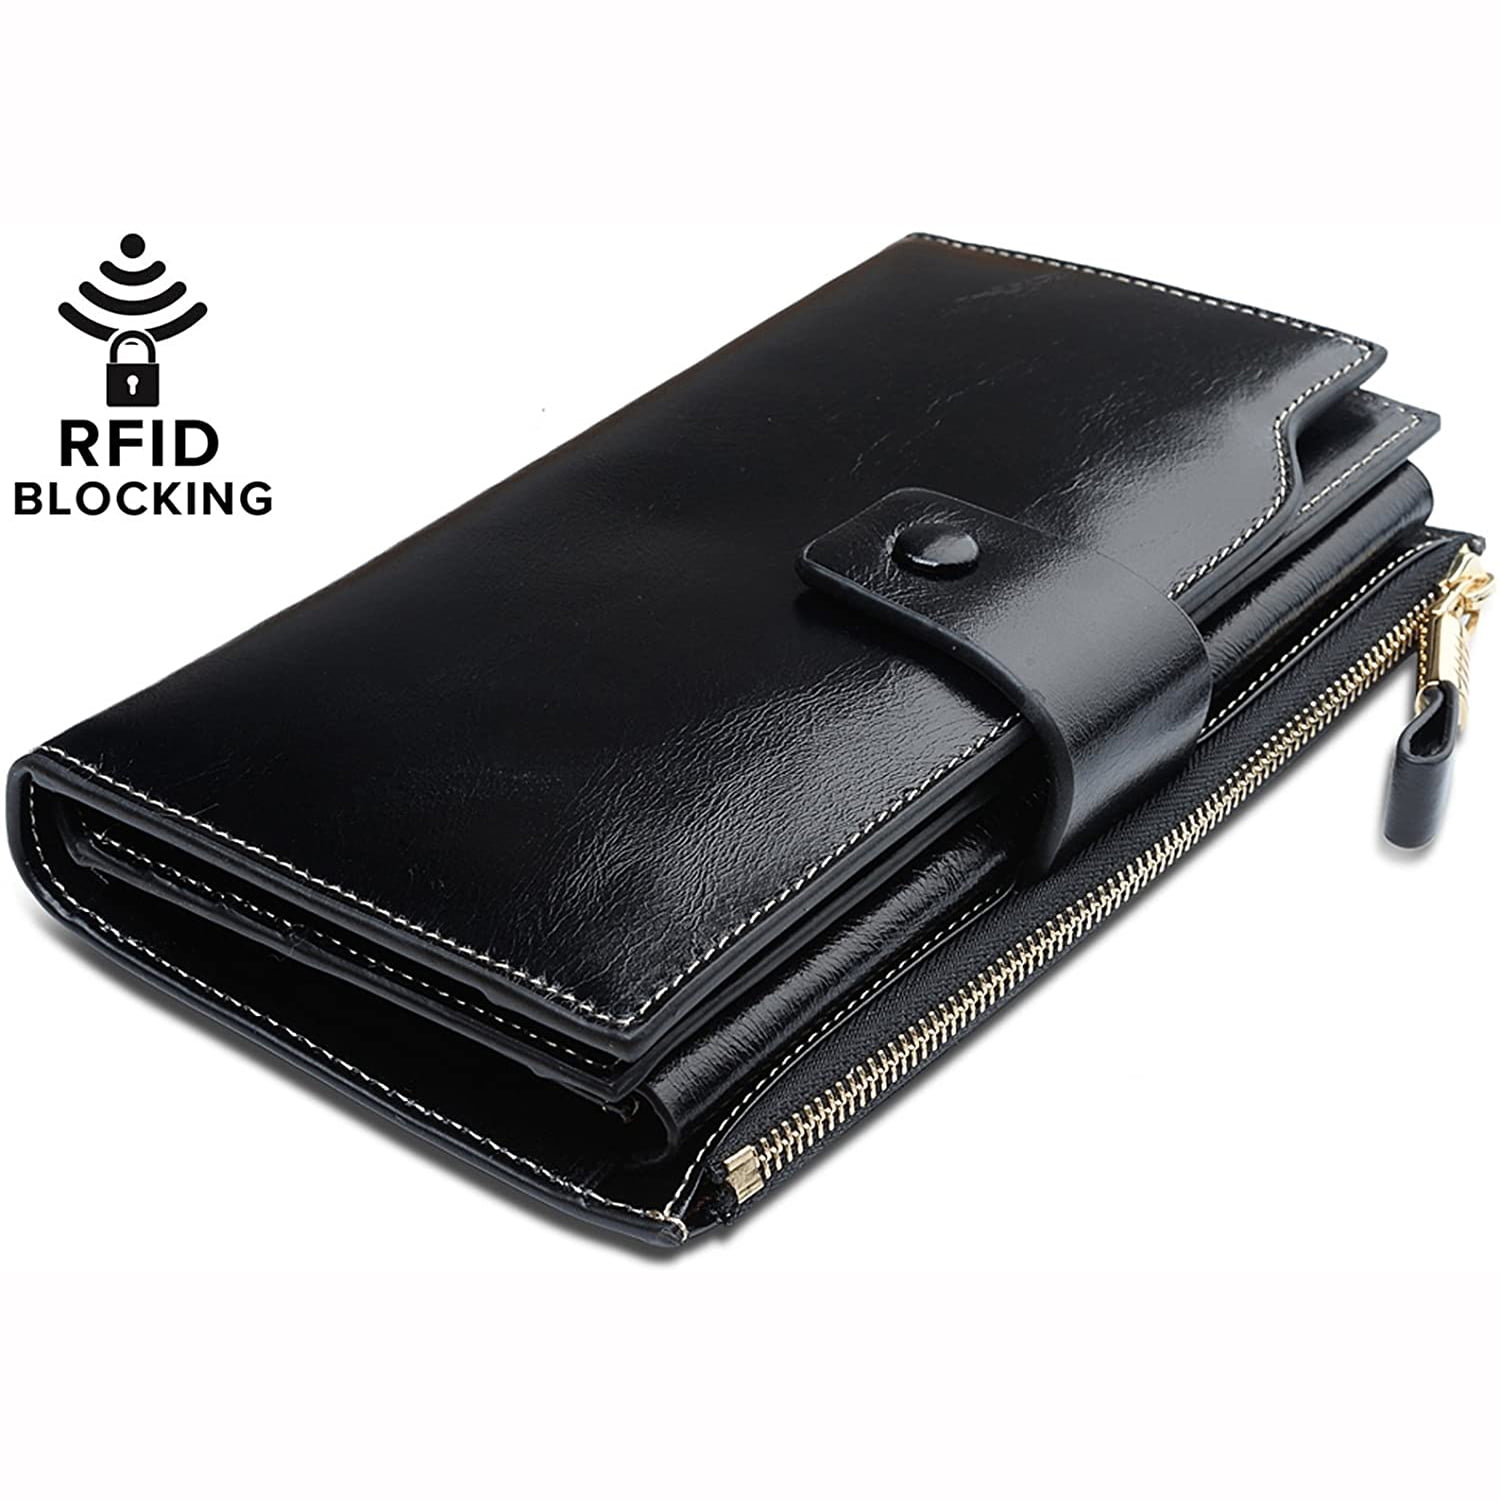 Womens Wallet Ladies Luxury Leather RFID Blocking Wallet Large Capacity Wax Genuine Ladies Purse with Gift Box Zipper Pocket & 20 Card Slots Perfect for Female 